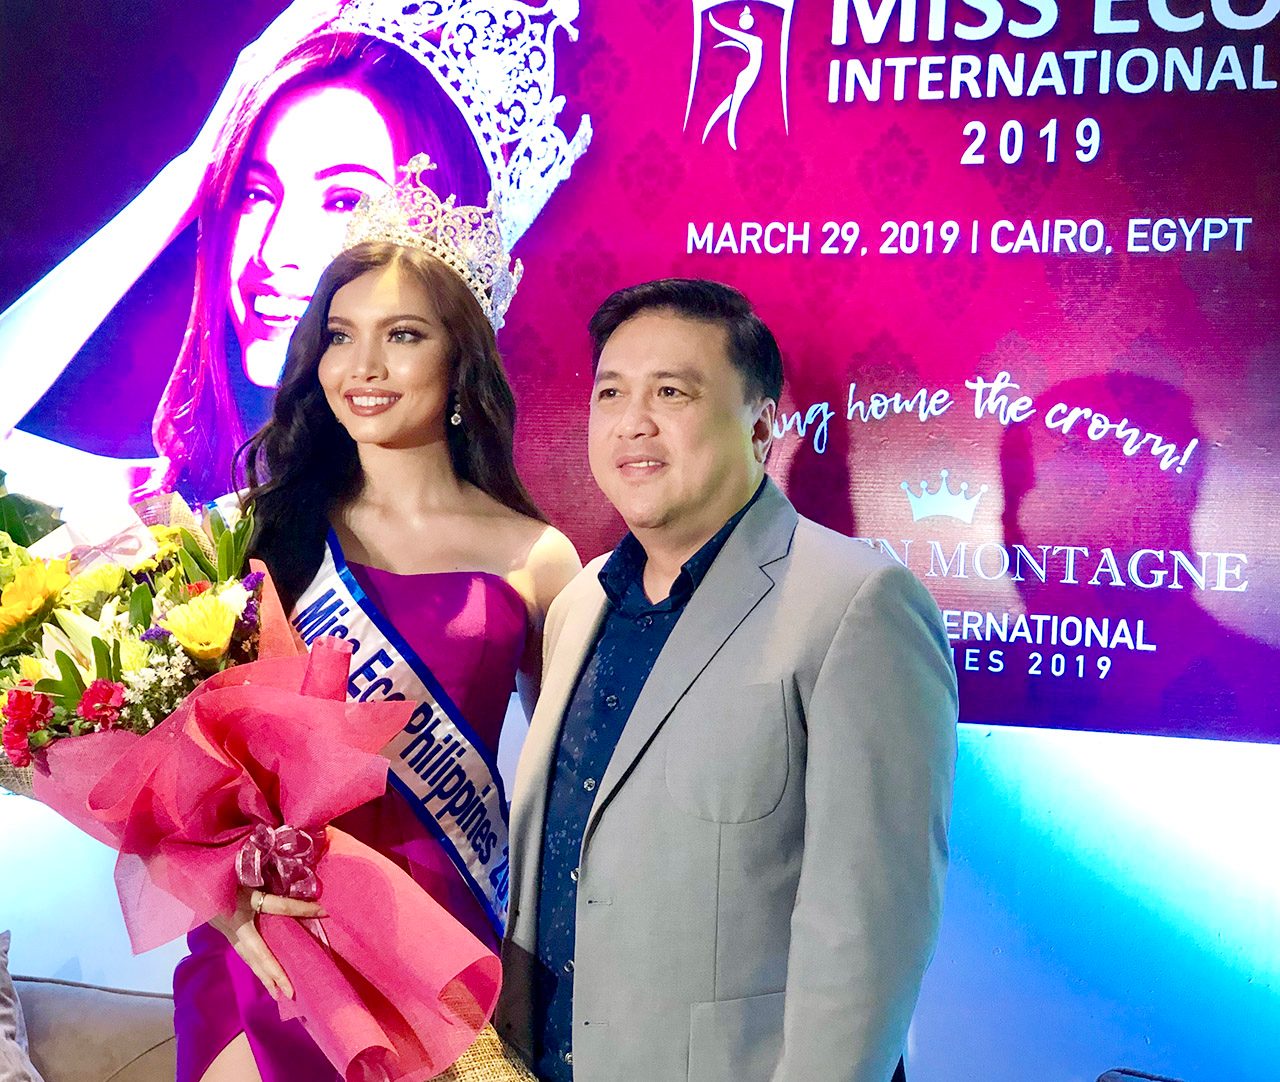 Maureen Montagne hopes for a back-to-back win in Miss Eco International